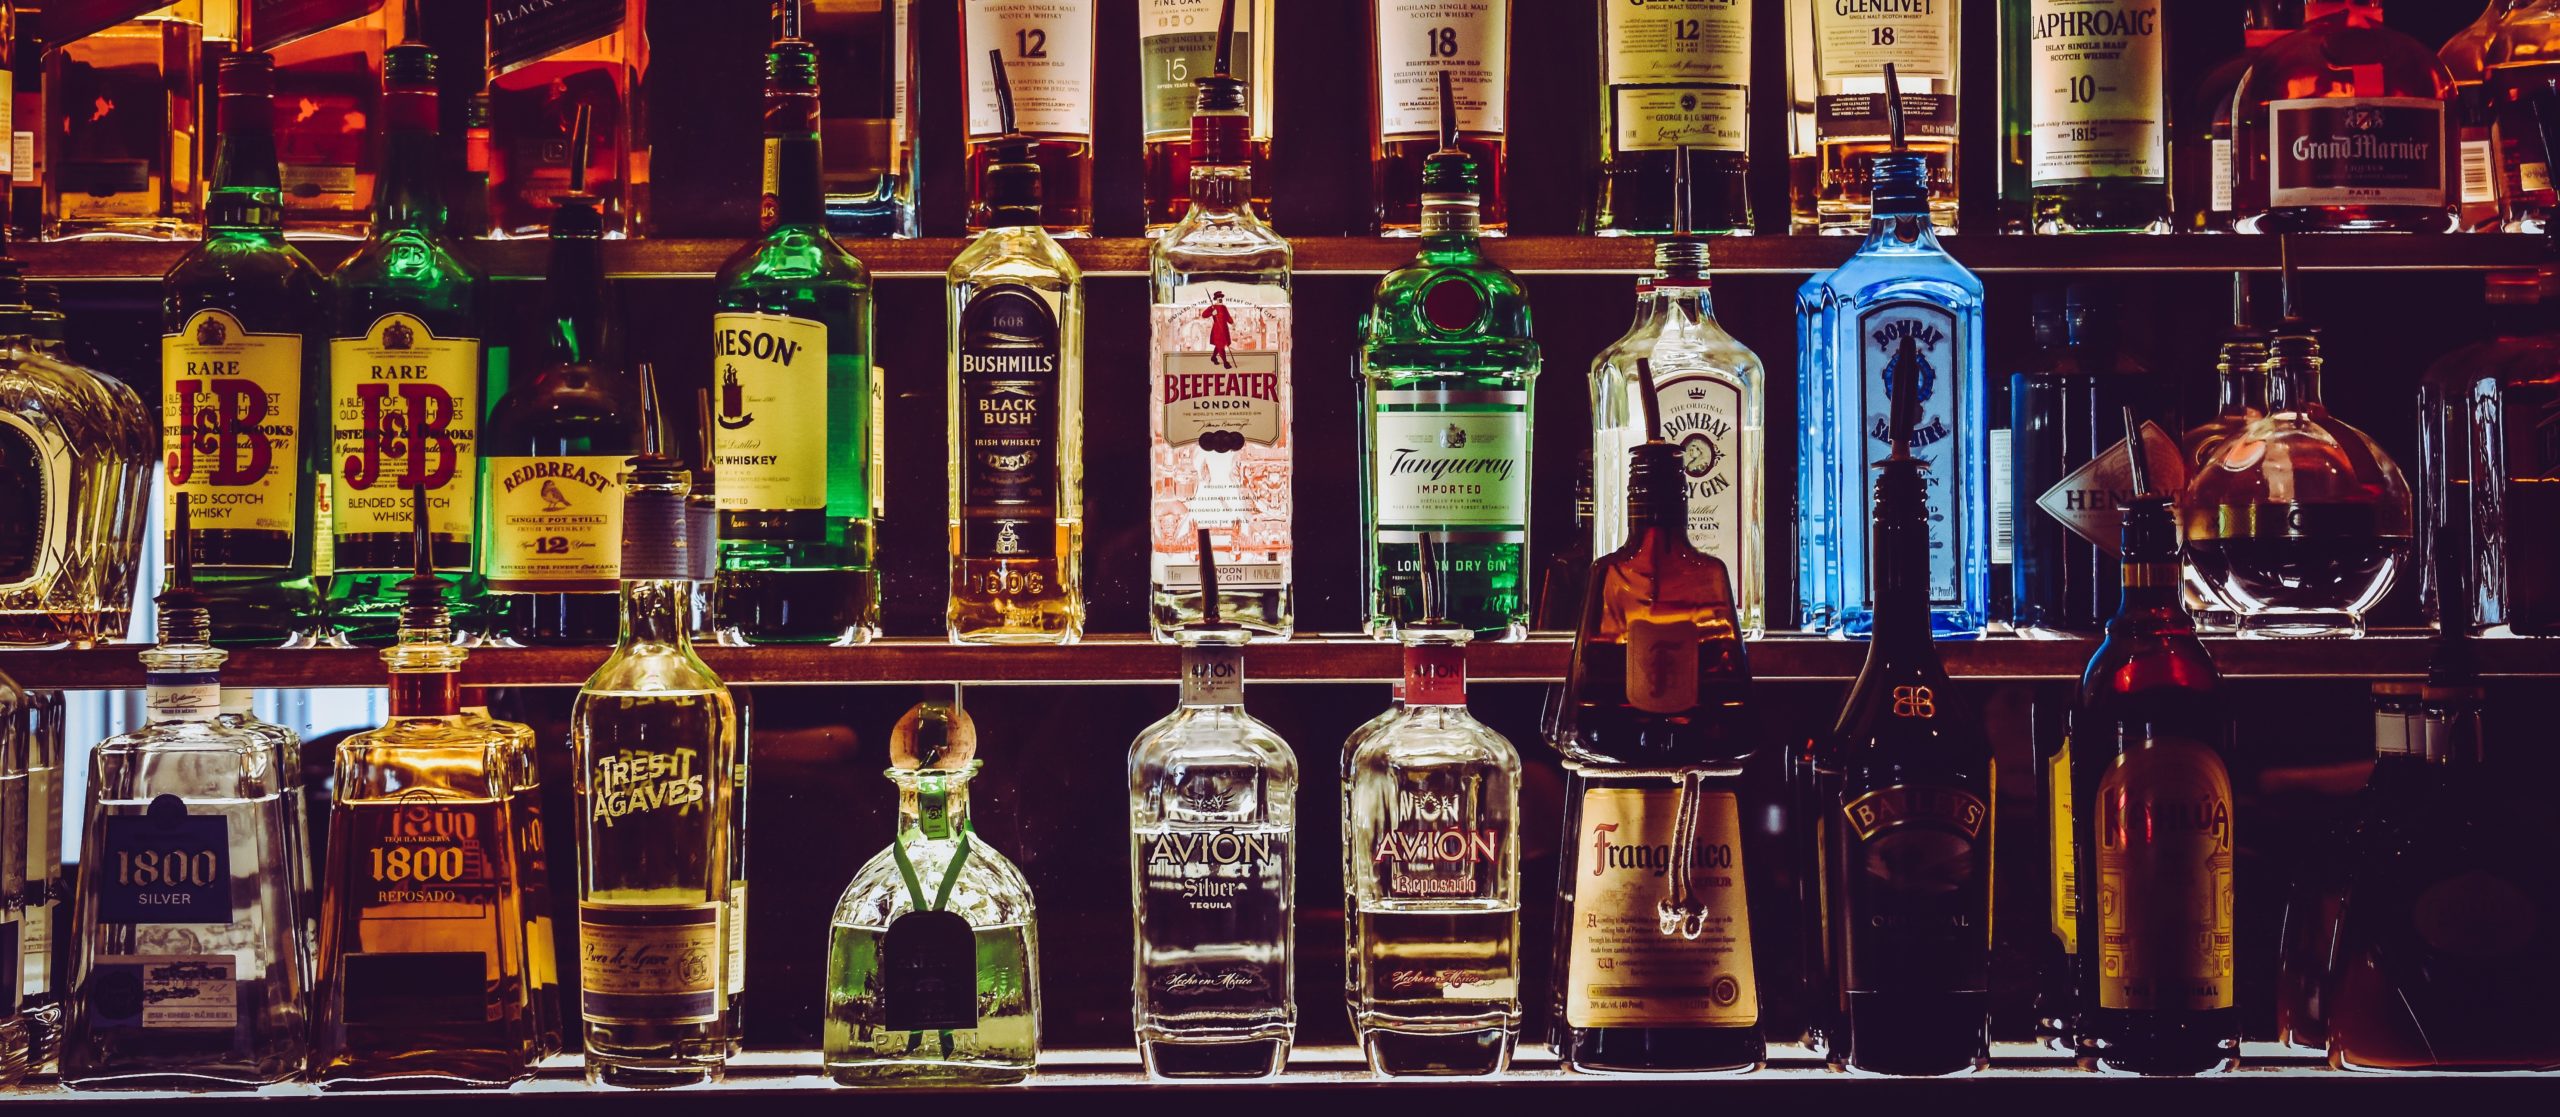 Have you failed a CPO by selling, or supplying alcohol to a minor?